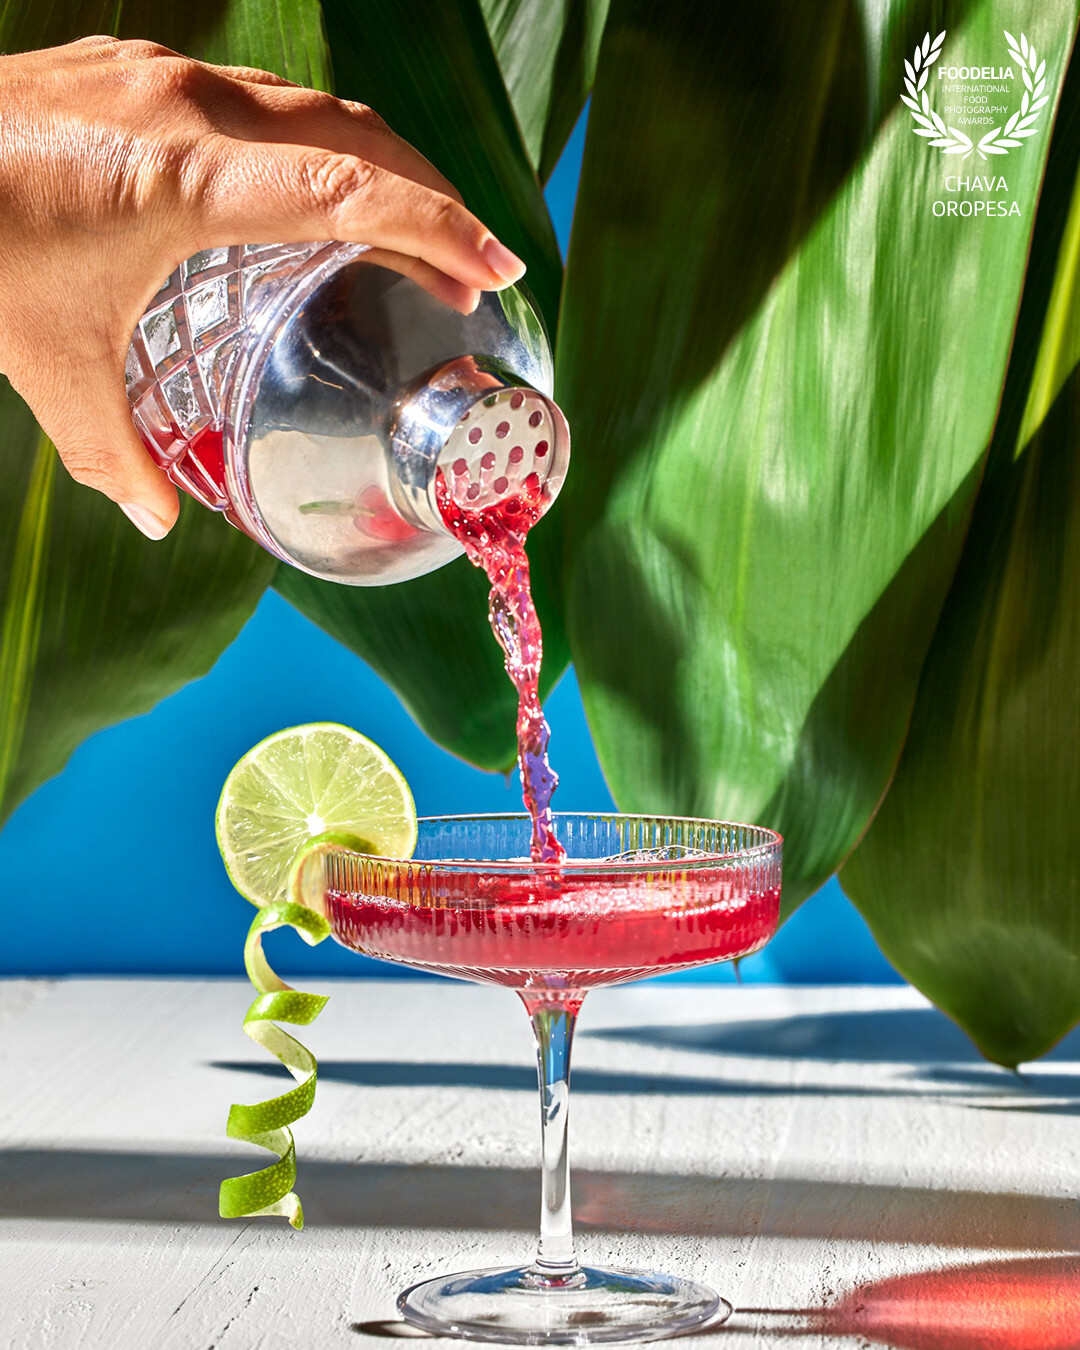 Editorial work for VegNews Magazine<br />
The Sorrel Ginger Daiquiri, part of their summer spread.<br />
Food Styling: Lorena Masso